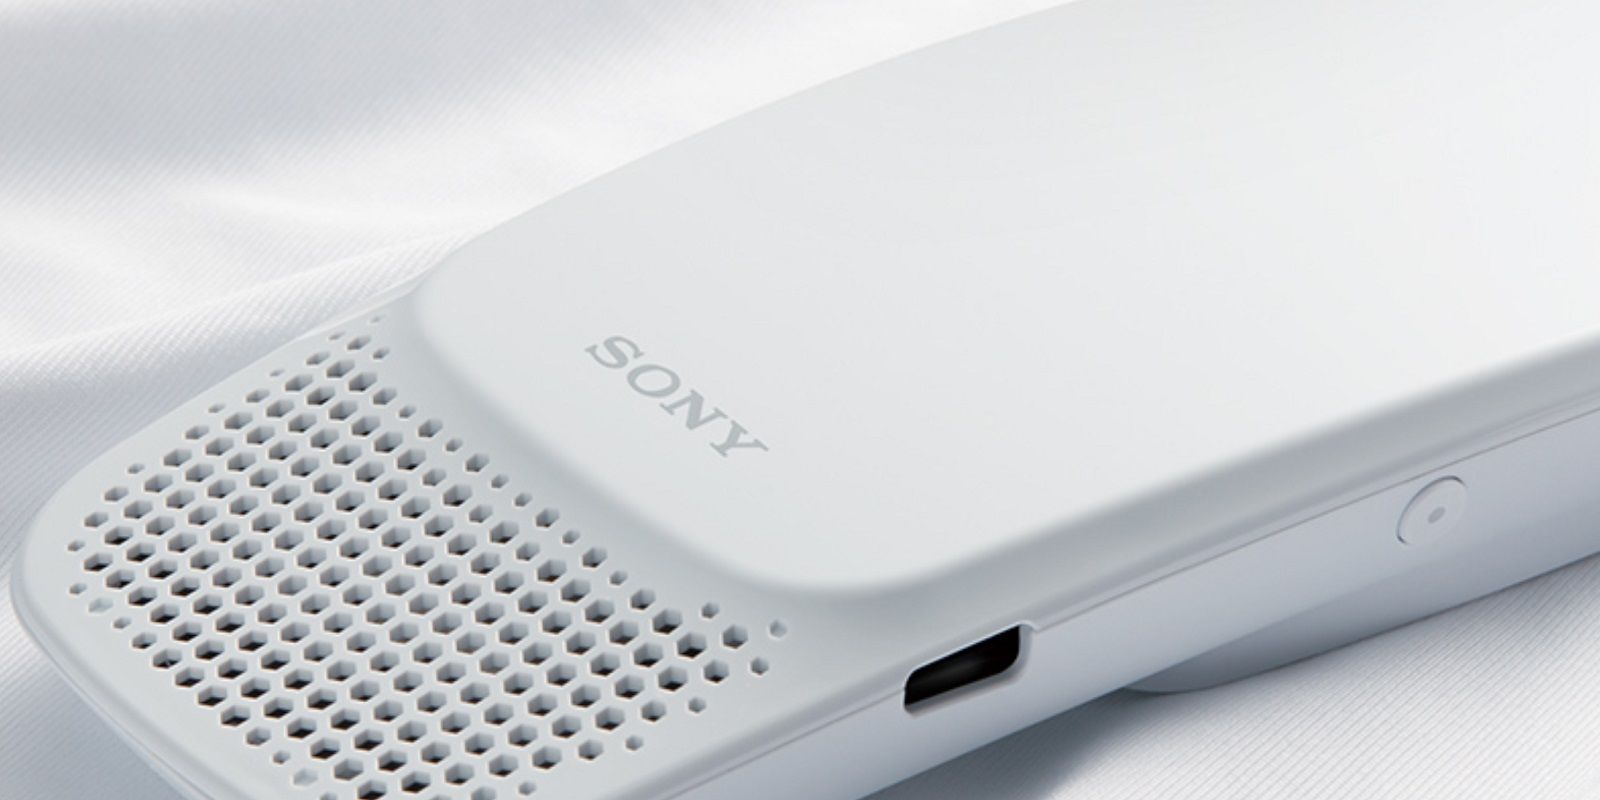 Sony Starts Selling ‘Reon Pocket’ Wearable Personal Air Conditioner